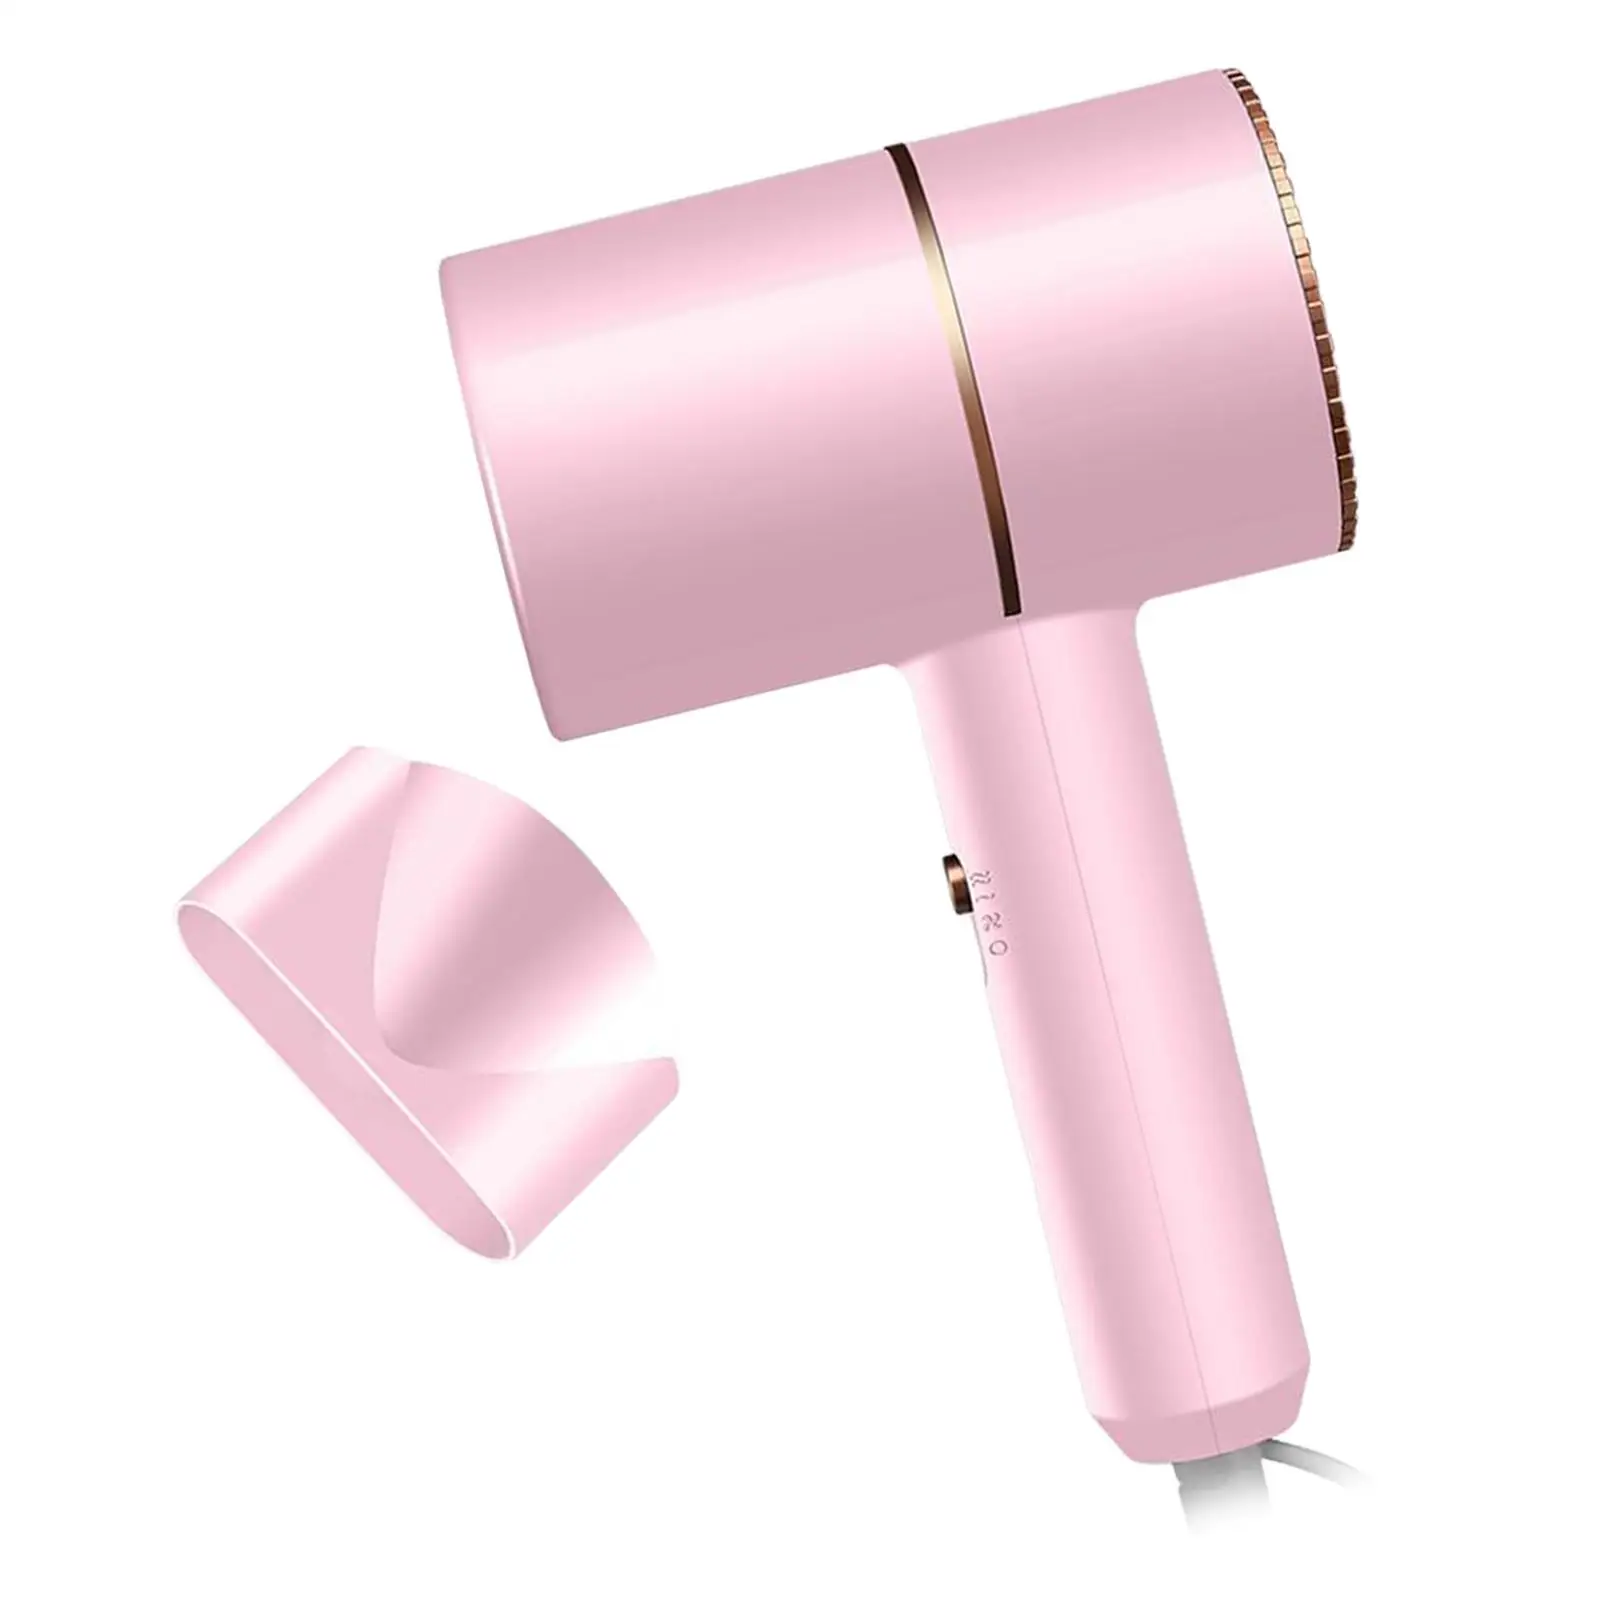 Professional Salon Hair Dryer Blow Dryer Electric Hairdryer Hot/Cold Wind for Home Salon Travel Use--EU Plug